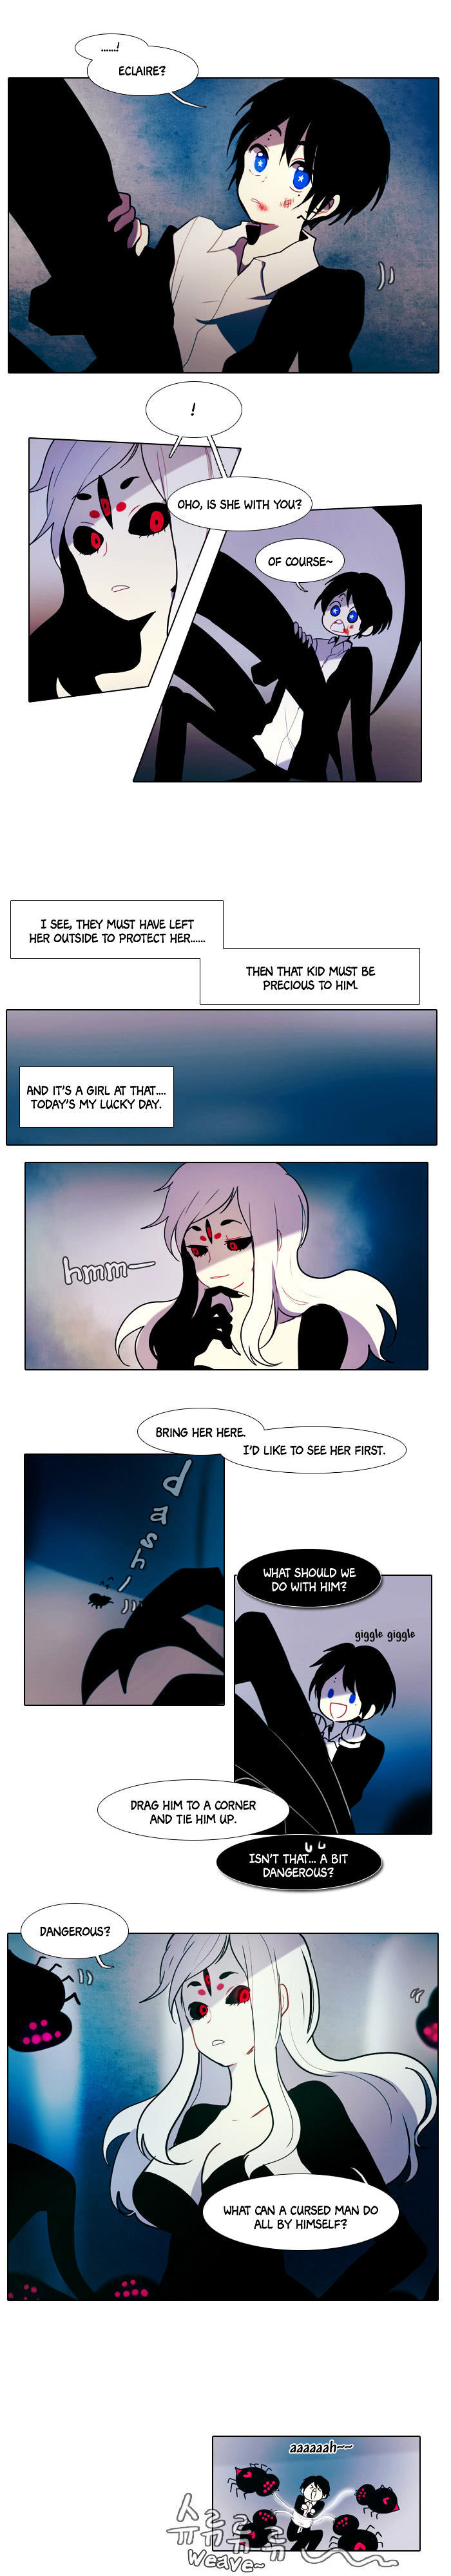 End and Save - Chapter 12 Page 5